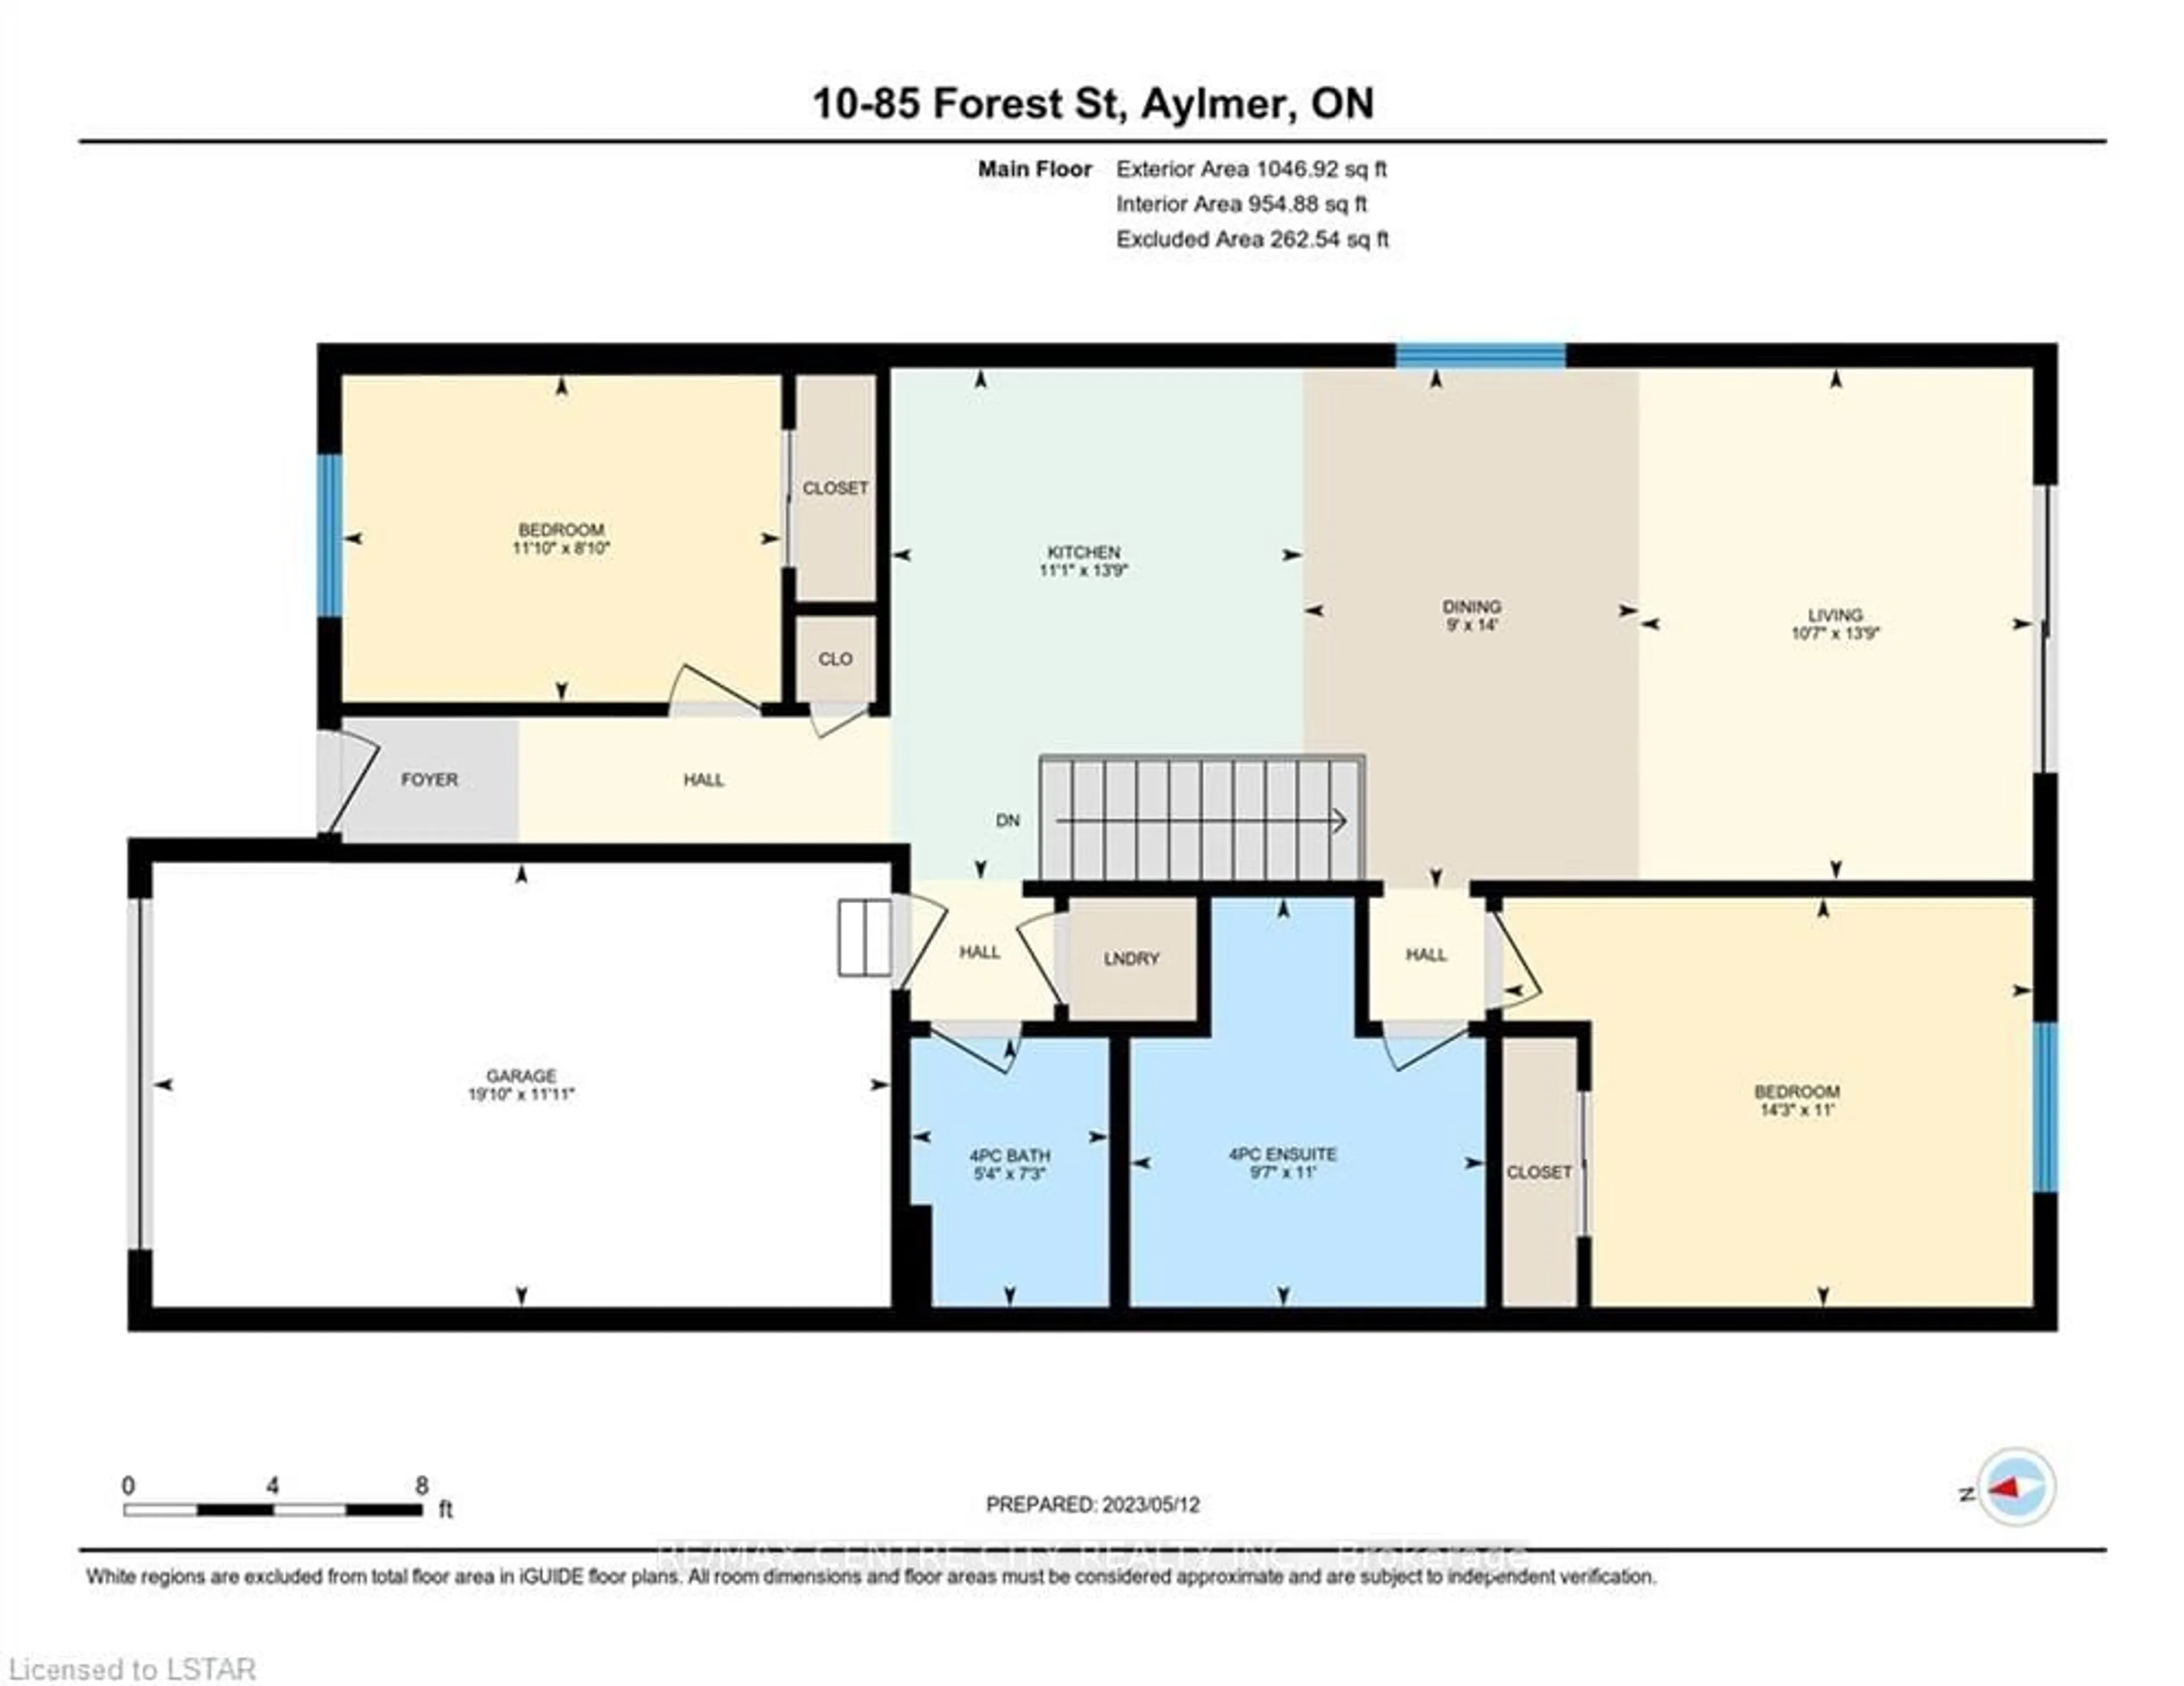 Floor plan for 85 Forest St #2, Aylmer Ontario N5H 1A5